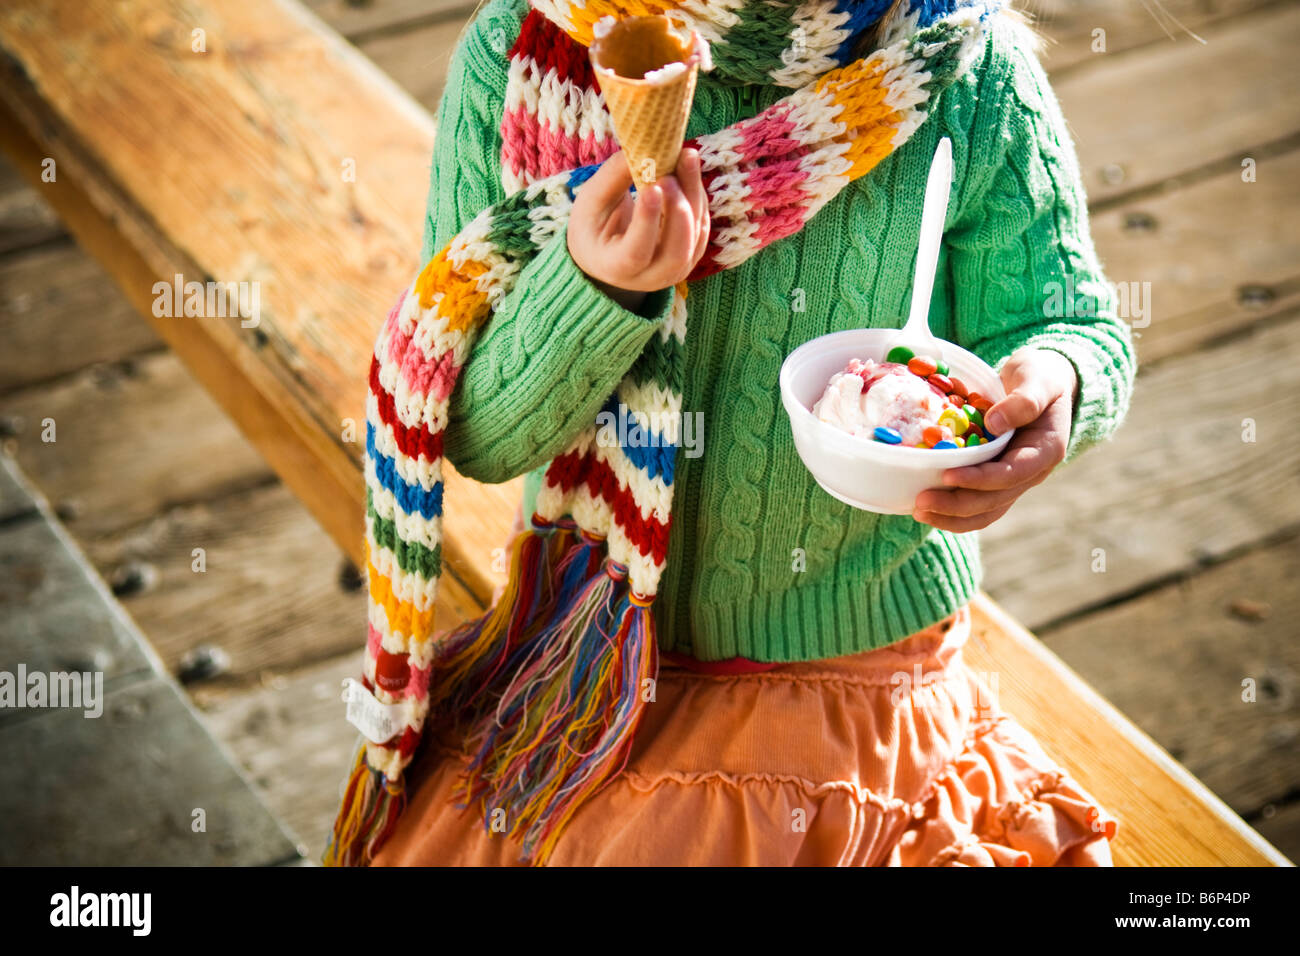 A girl, 4-5 years, enjoys a bowl of ice cream and m&m's on a cold day. Stock Photo